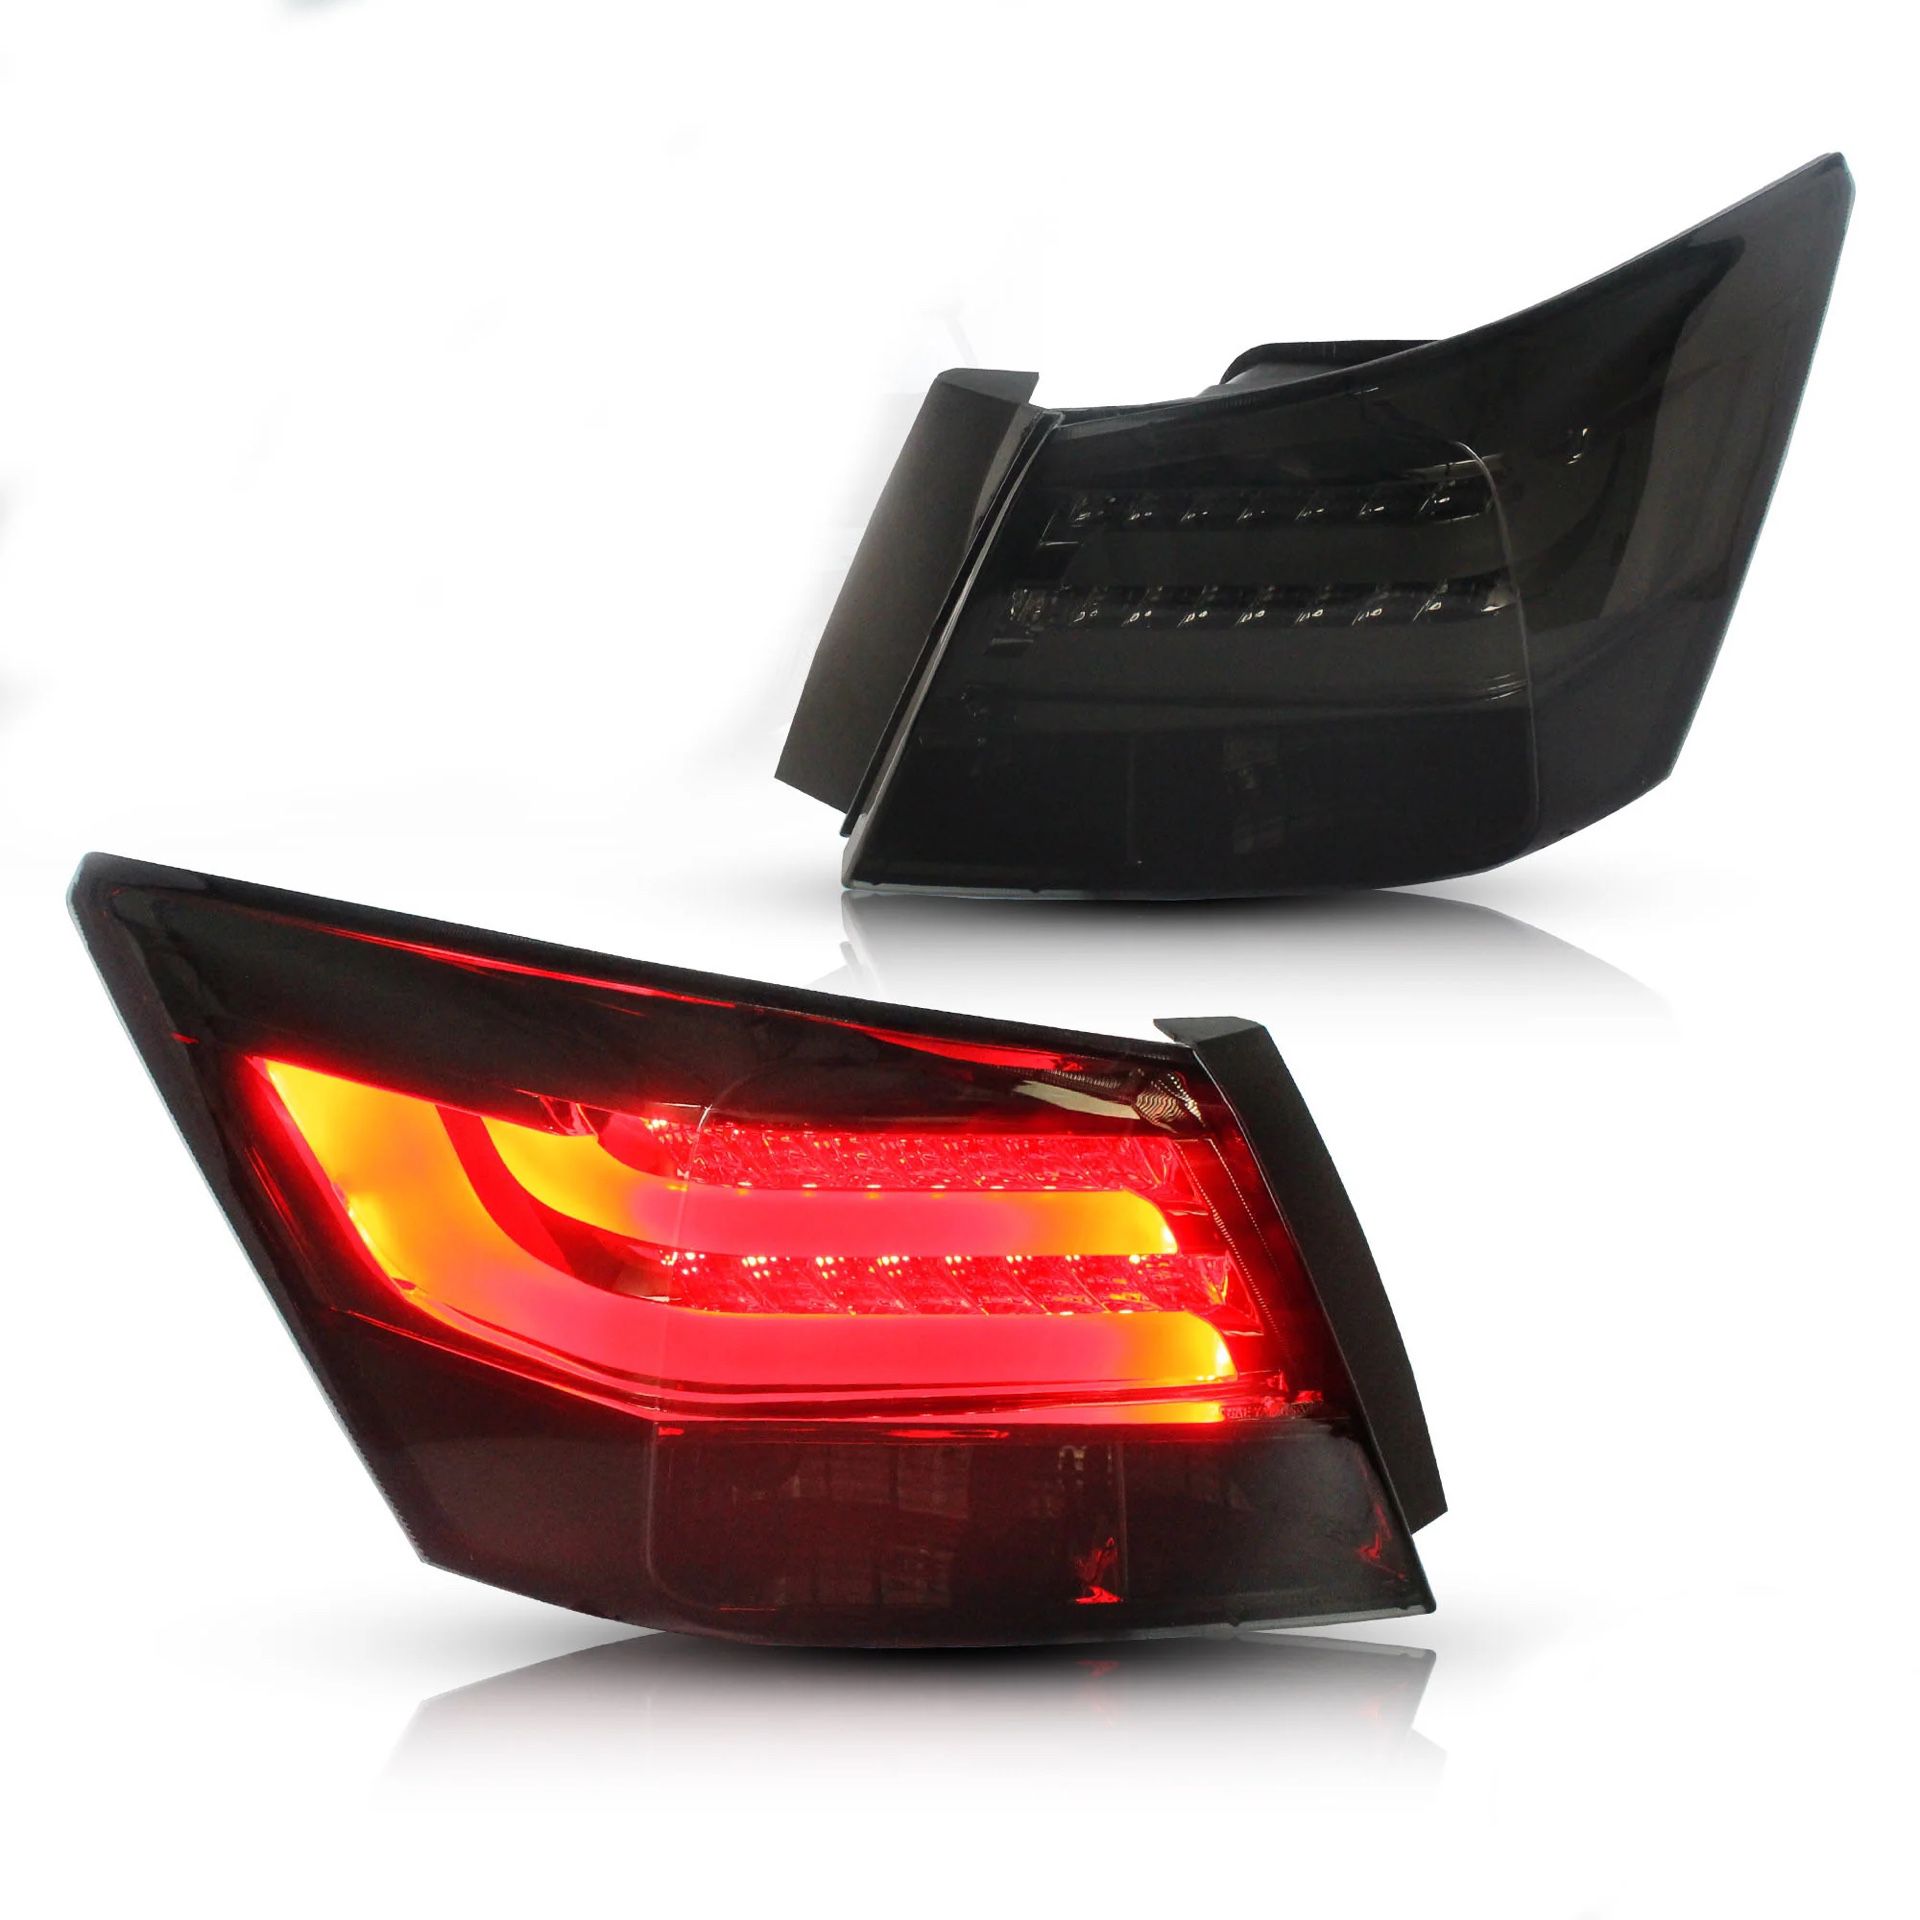 New LED Tail lights For Honda Accord 2008-2012 Aftermarket Rear Lamps [2PCS]